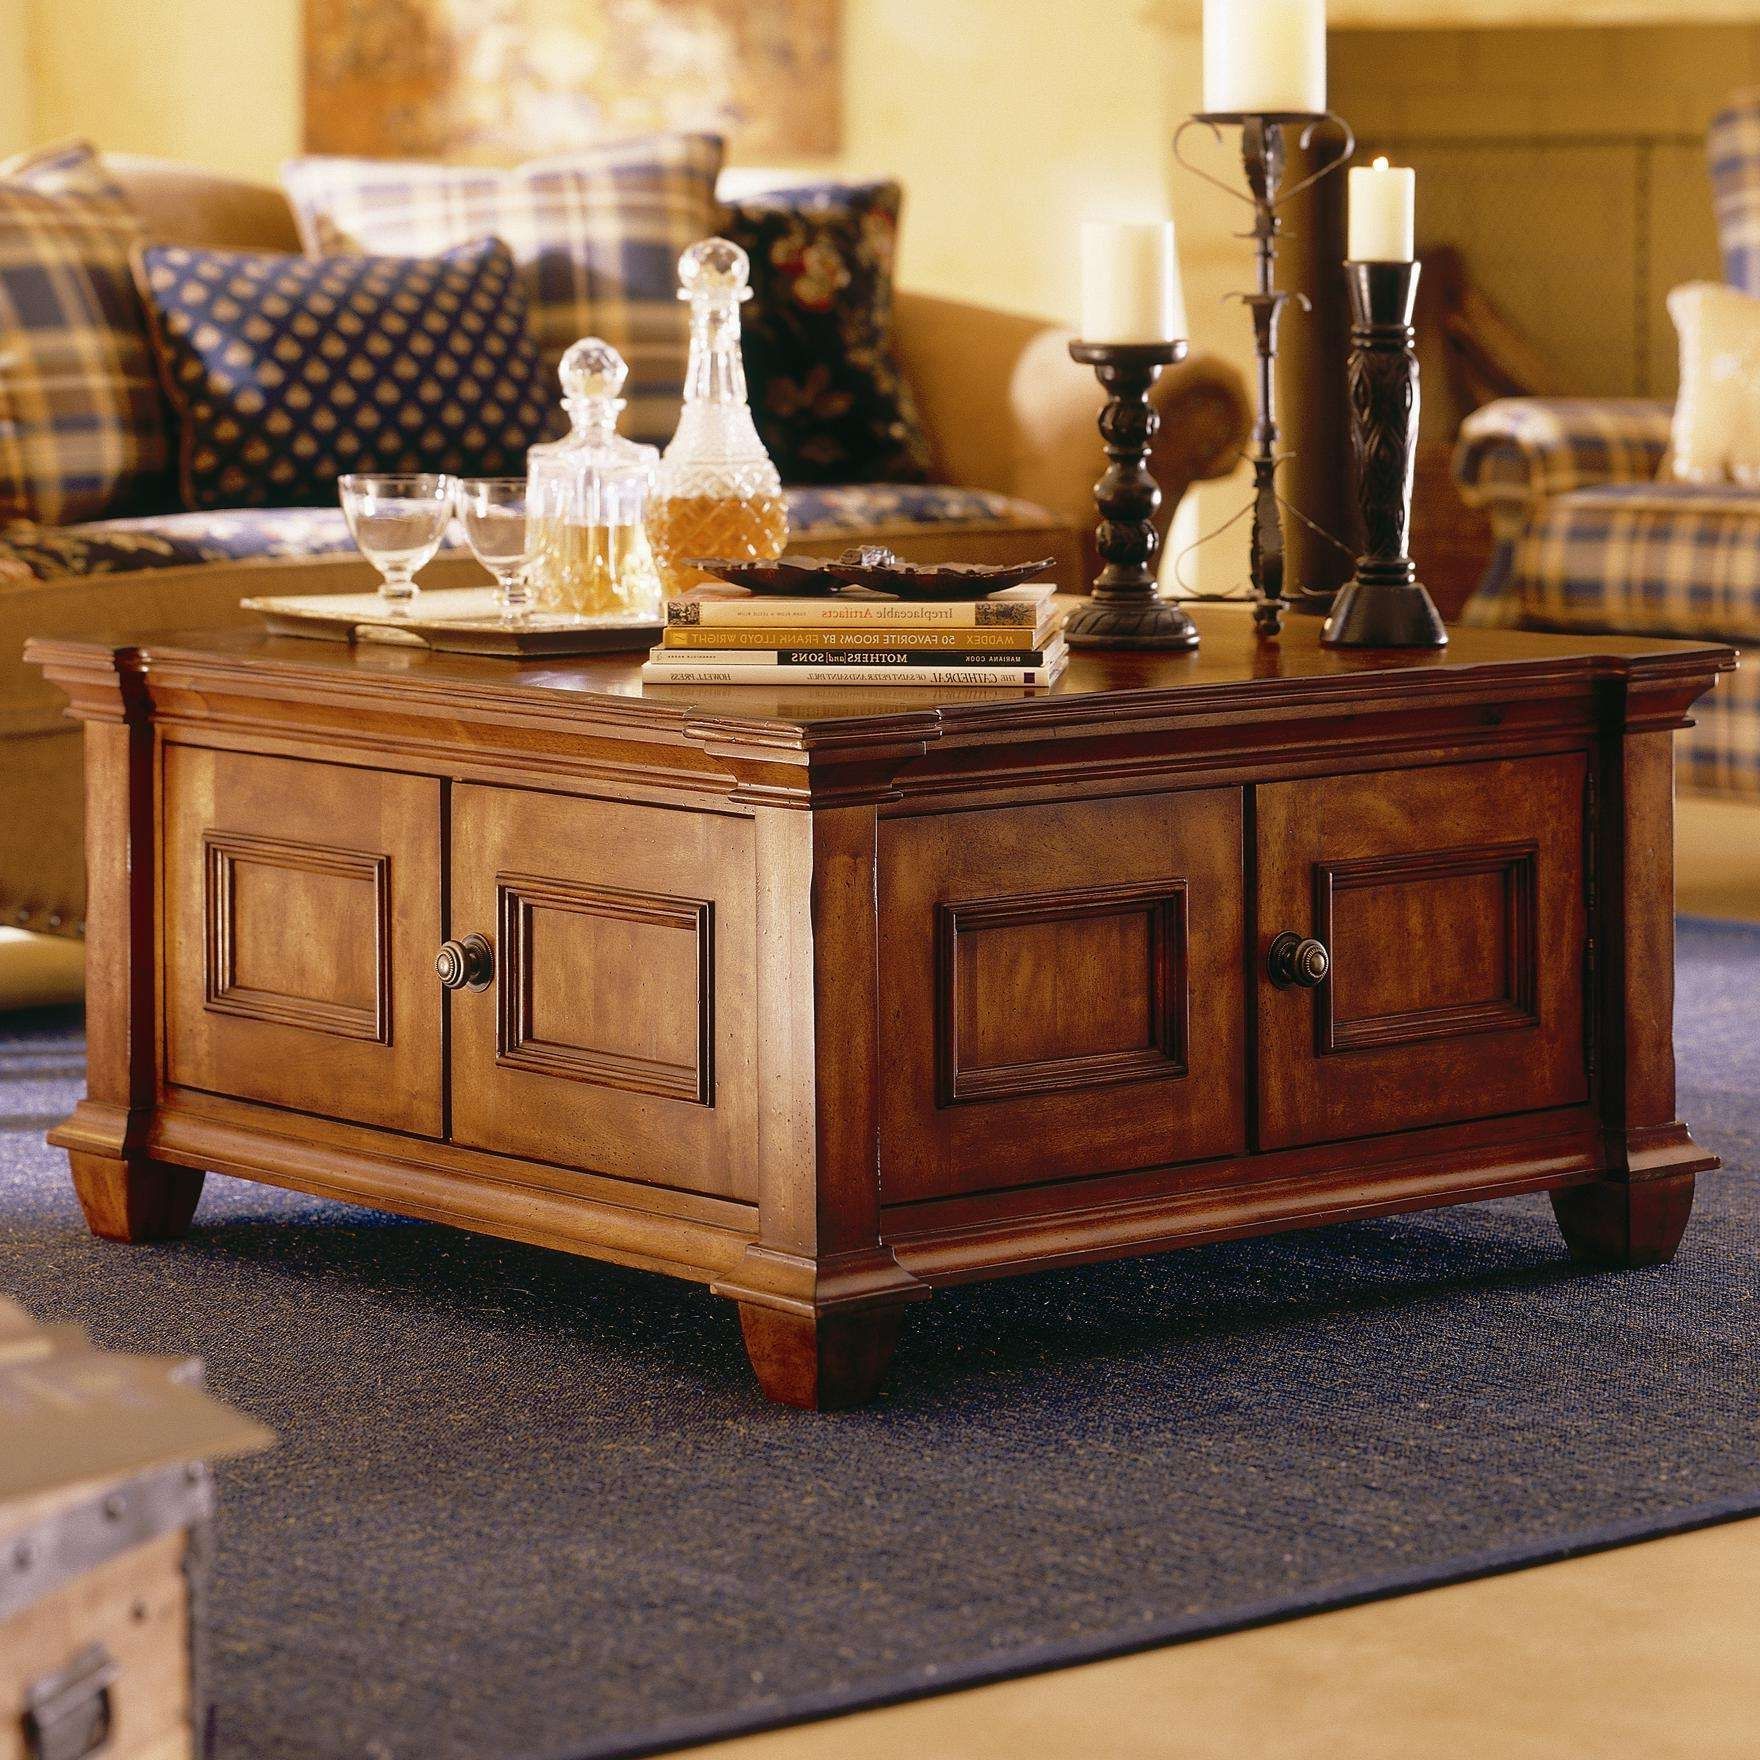 Coffee Tables : Coffee Table Square Wood With Storage Tables Glass Pertaining To Preferred Large Square Coffee Tables (Gallery 16 of 20)